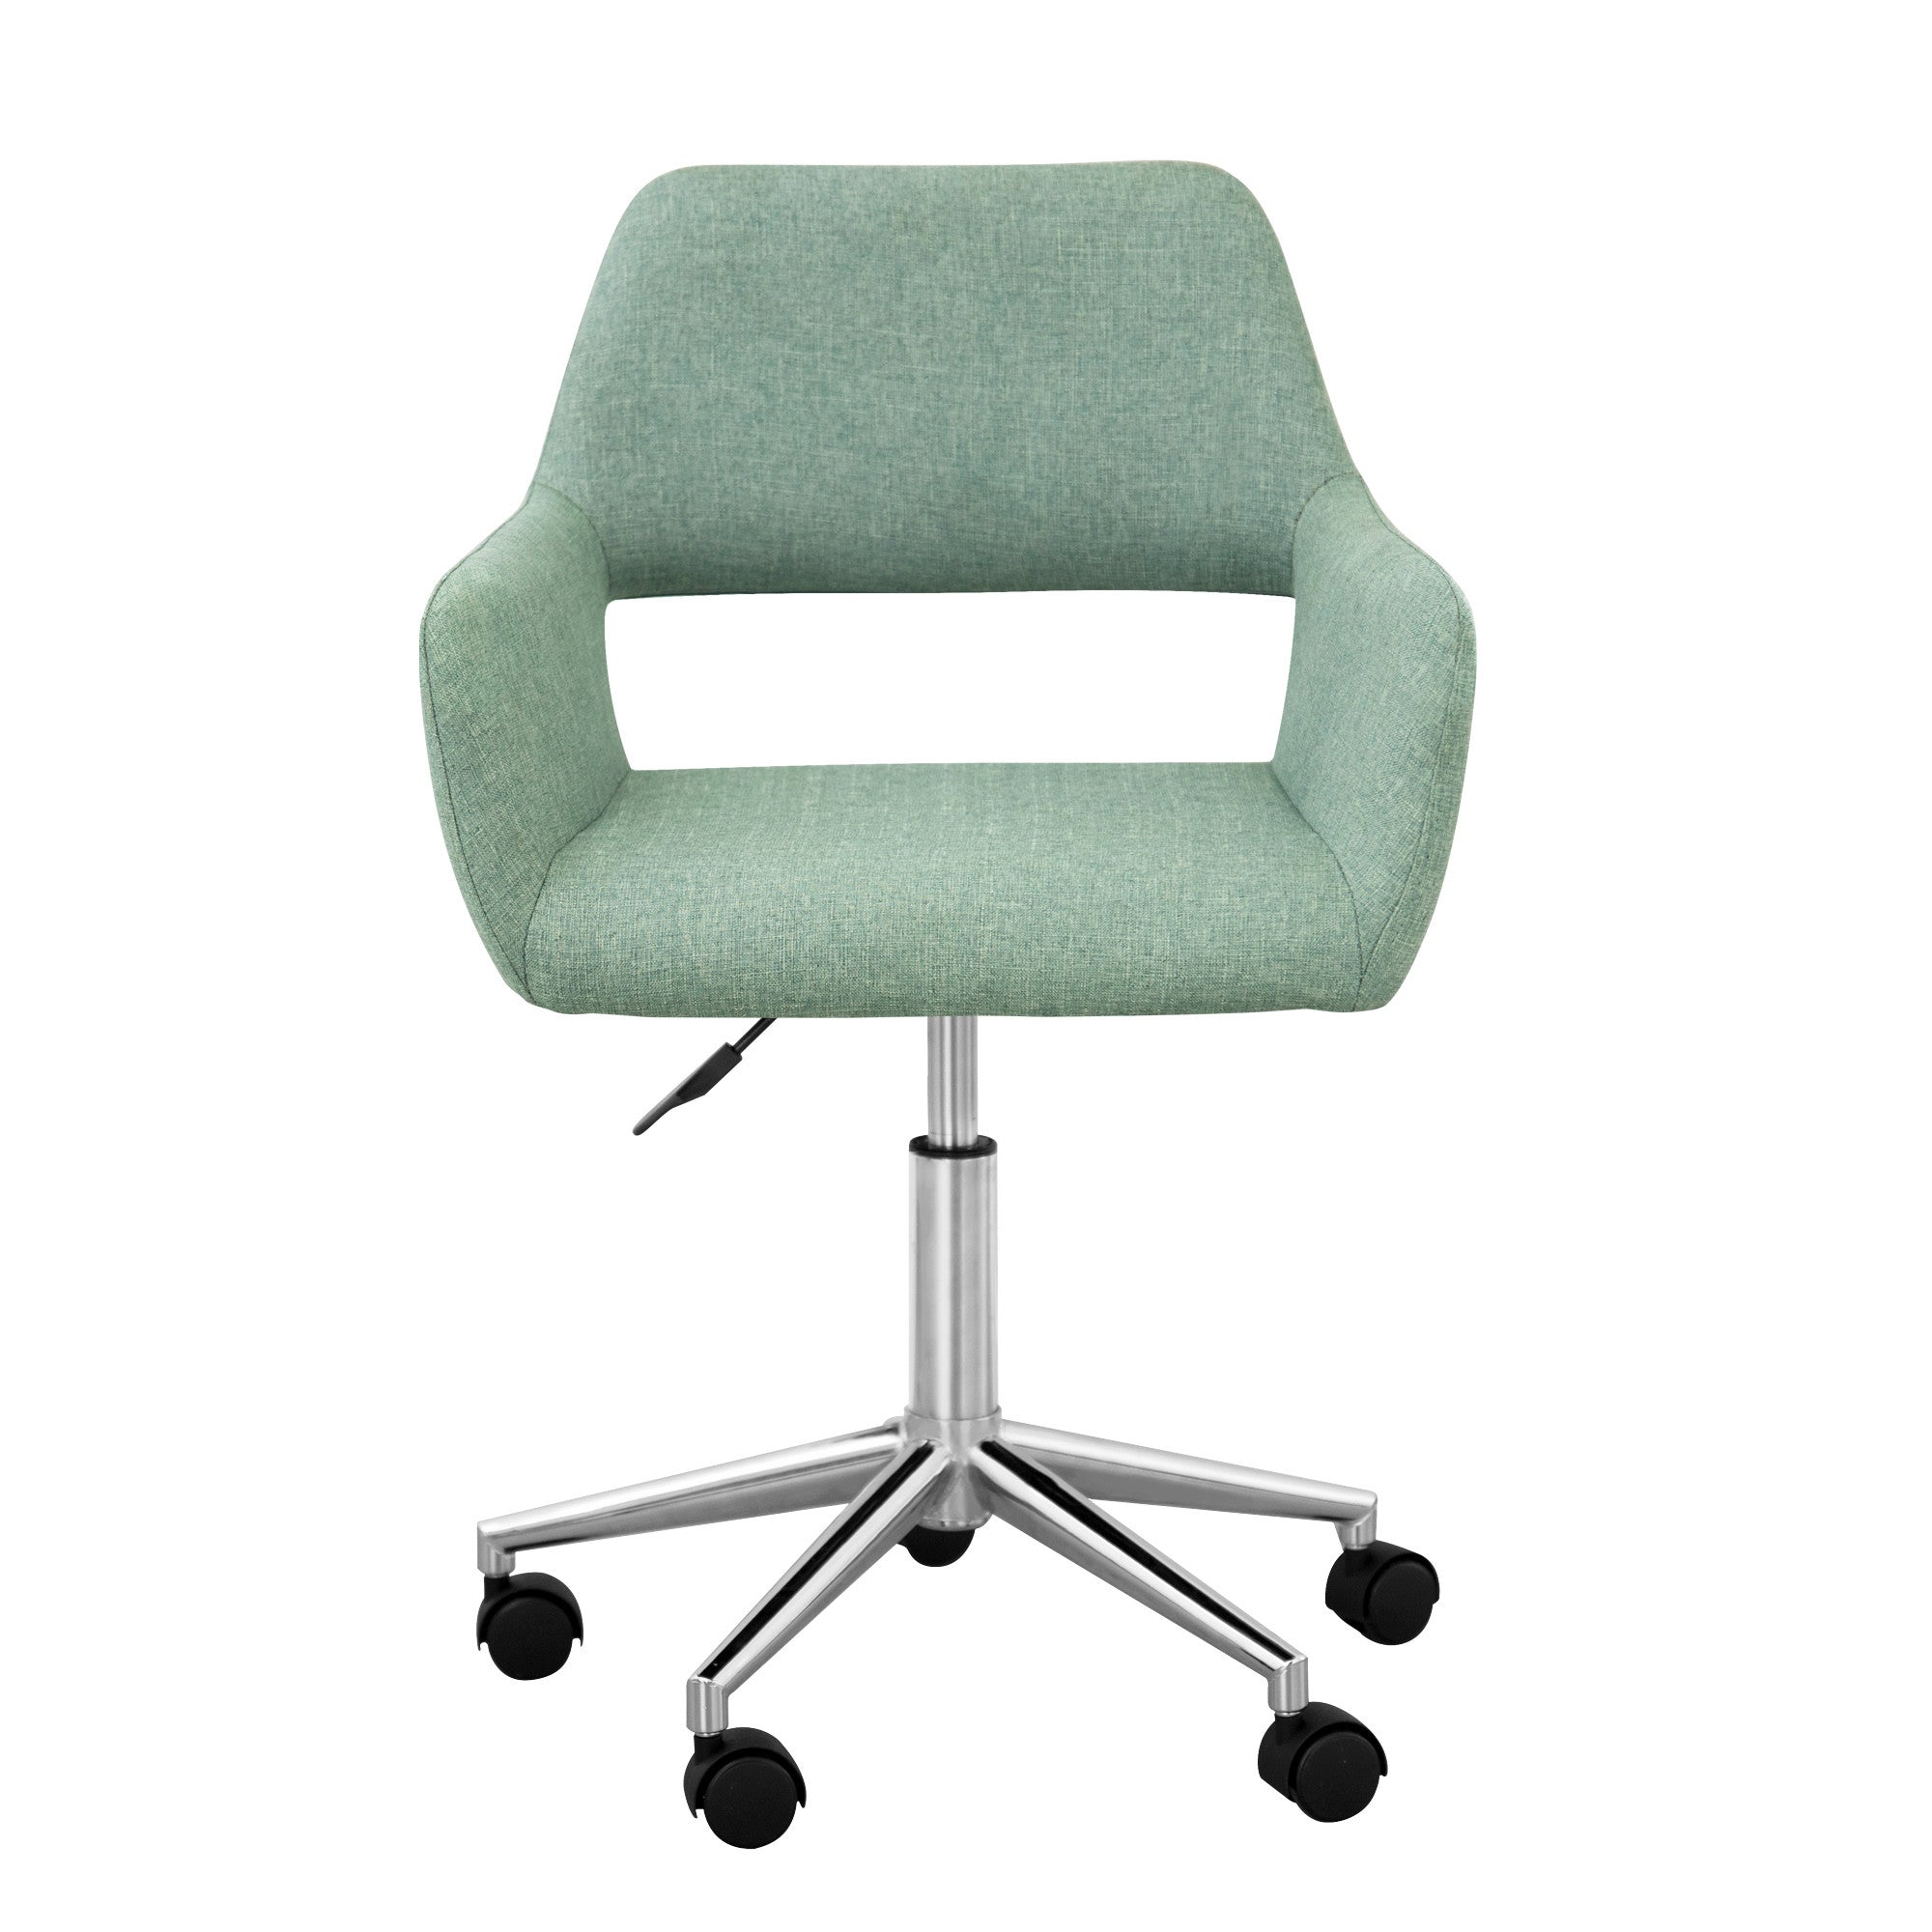 Teamson Home Modern Fabric Office Chair with Adjustable Ergonomic Seat, Swivel Base, and Wheels, Mint/Chrome